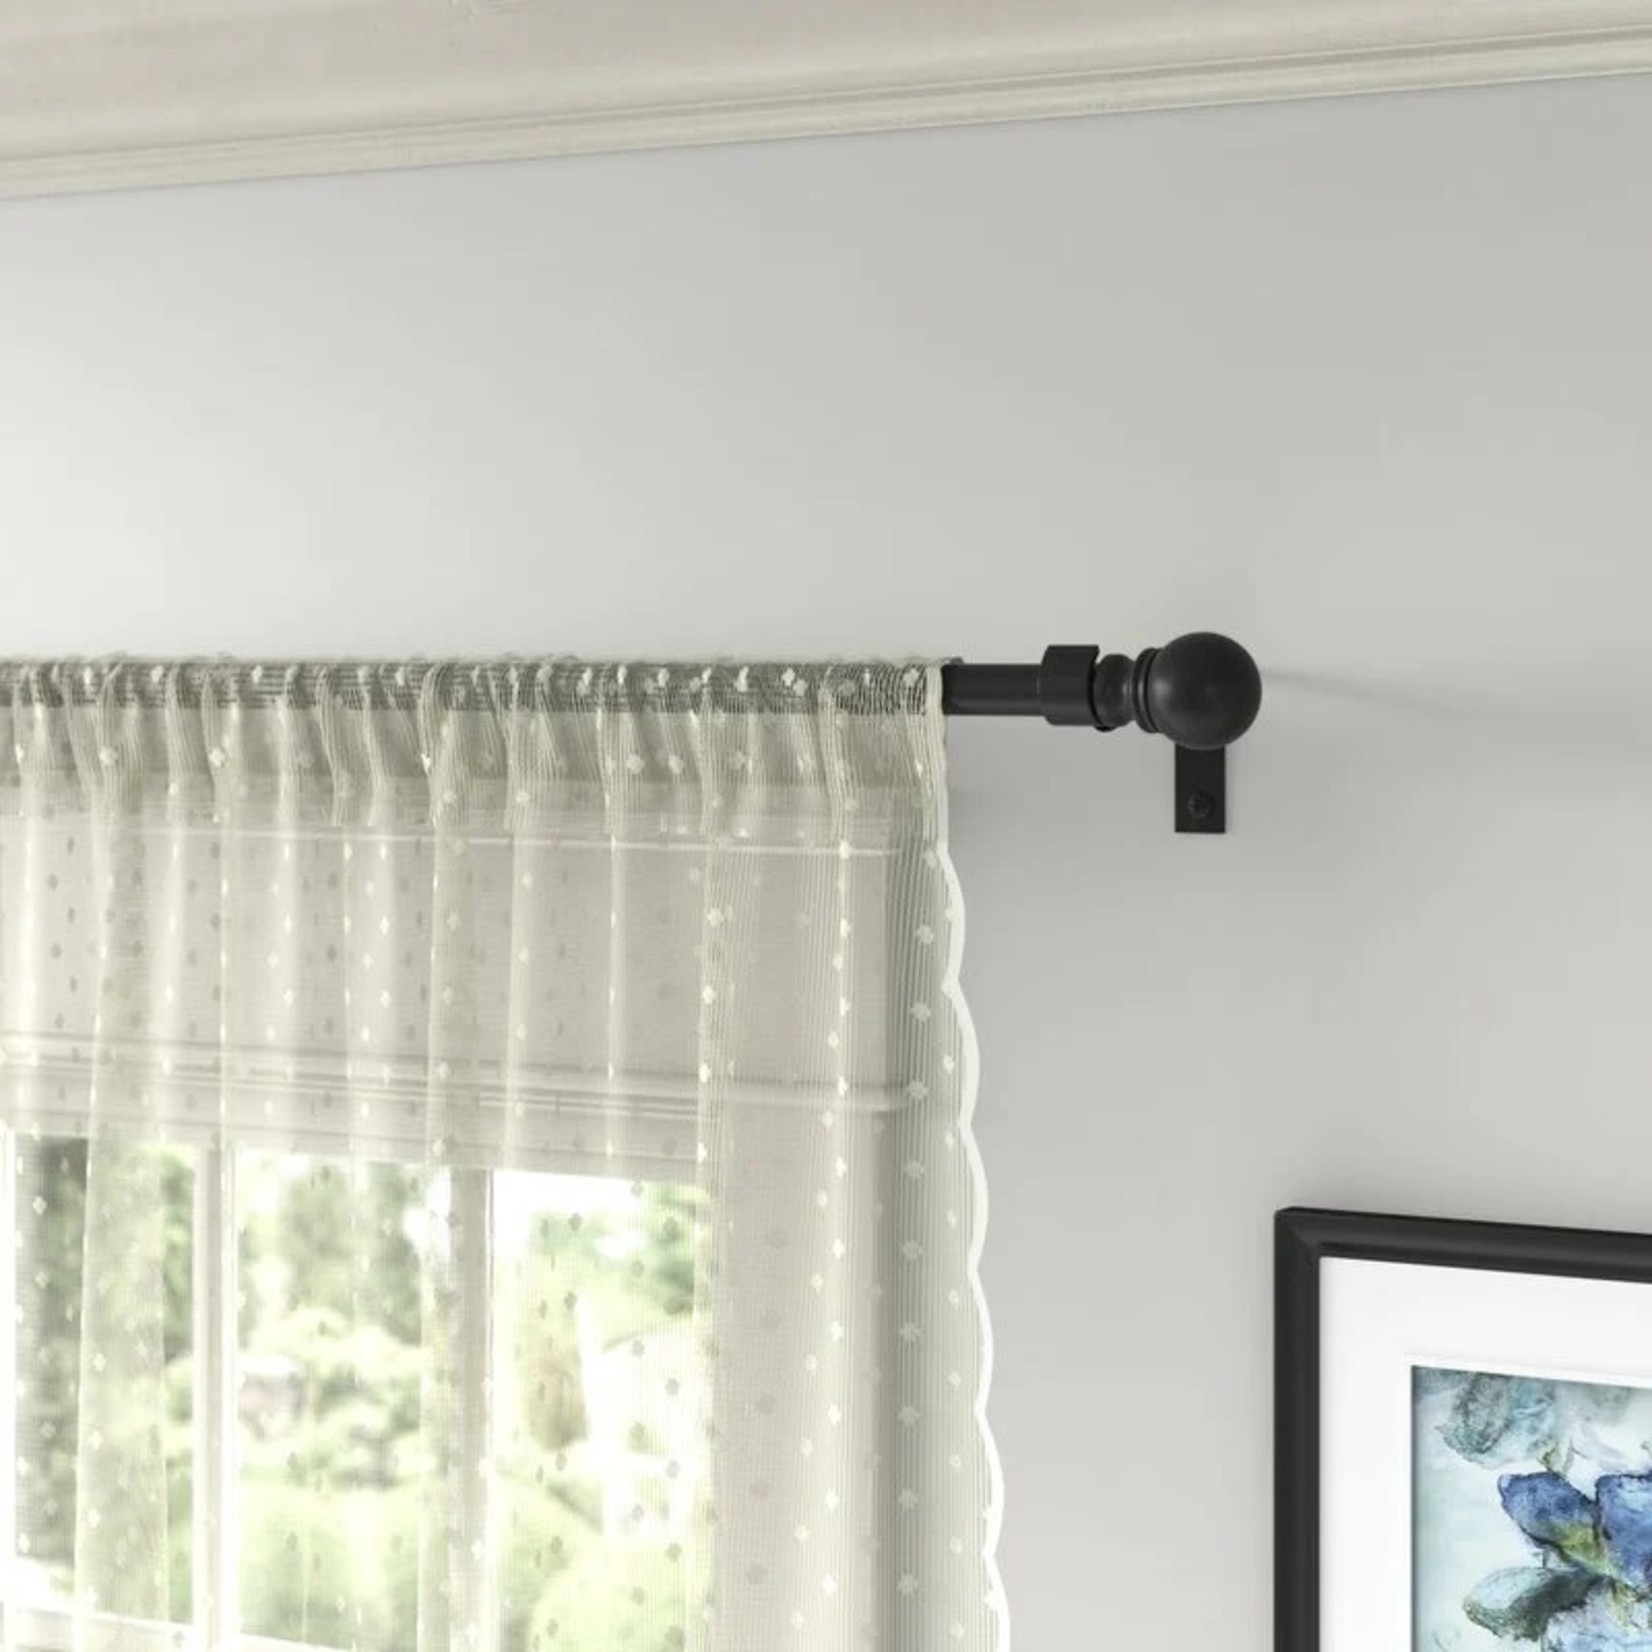 *Mendoza Adjustable 0.5" Single Curtain Rod - Missing screw on bracket to hold rod in place - Final Sale